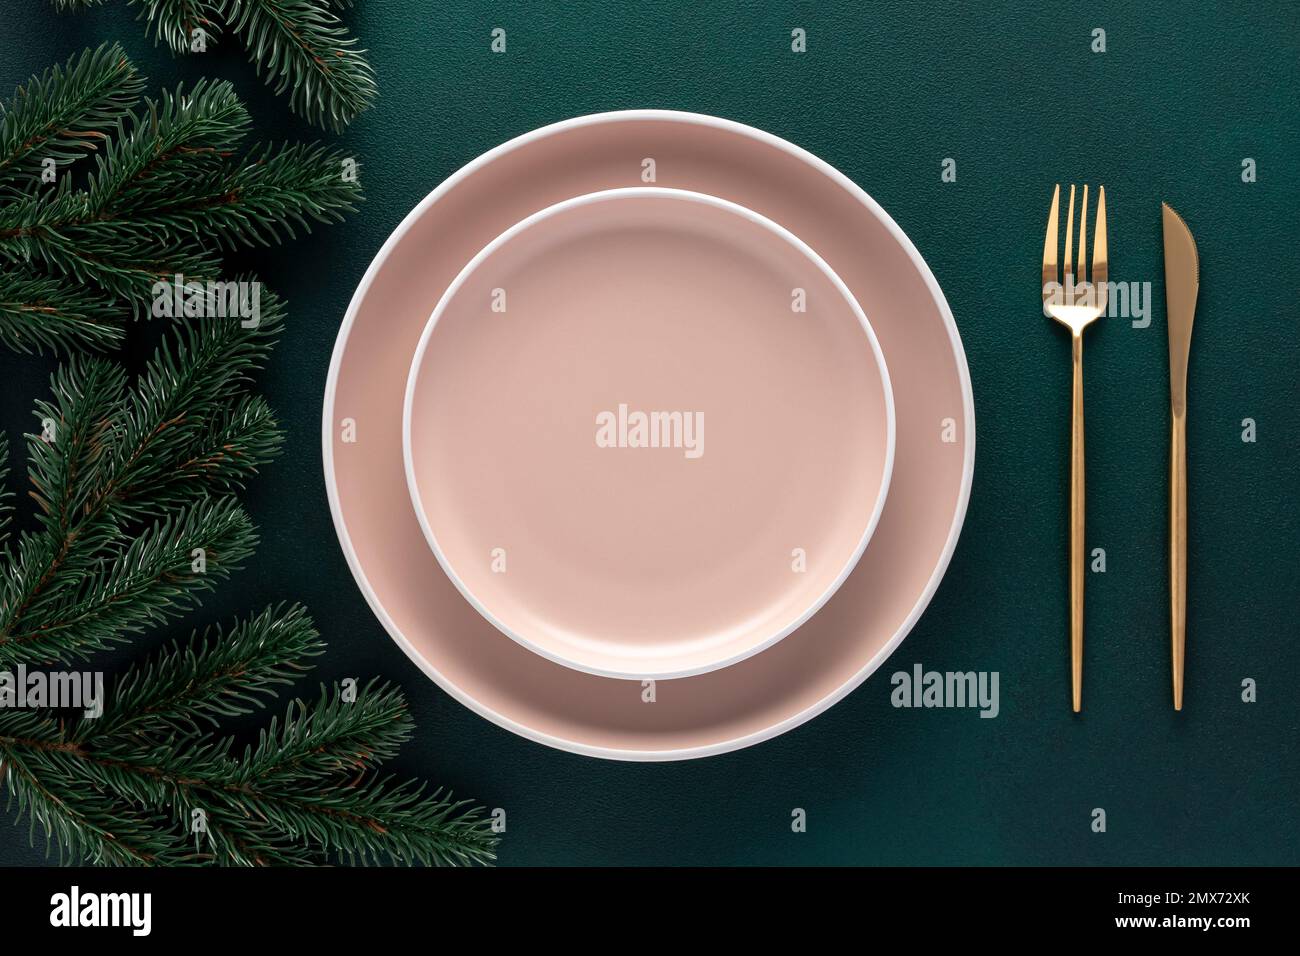 Empty beige plates on a dark green background. Top view. Card or menu template, flat design. Tableware, crockery. Aerial view, copy space. Christmas t Stock Photo